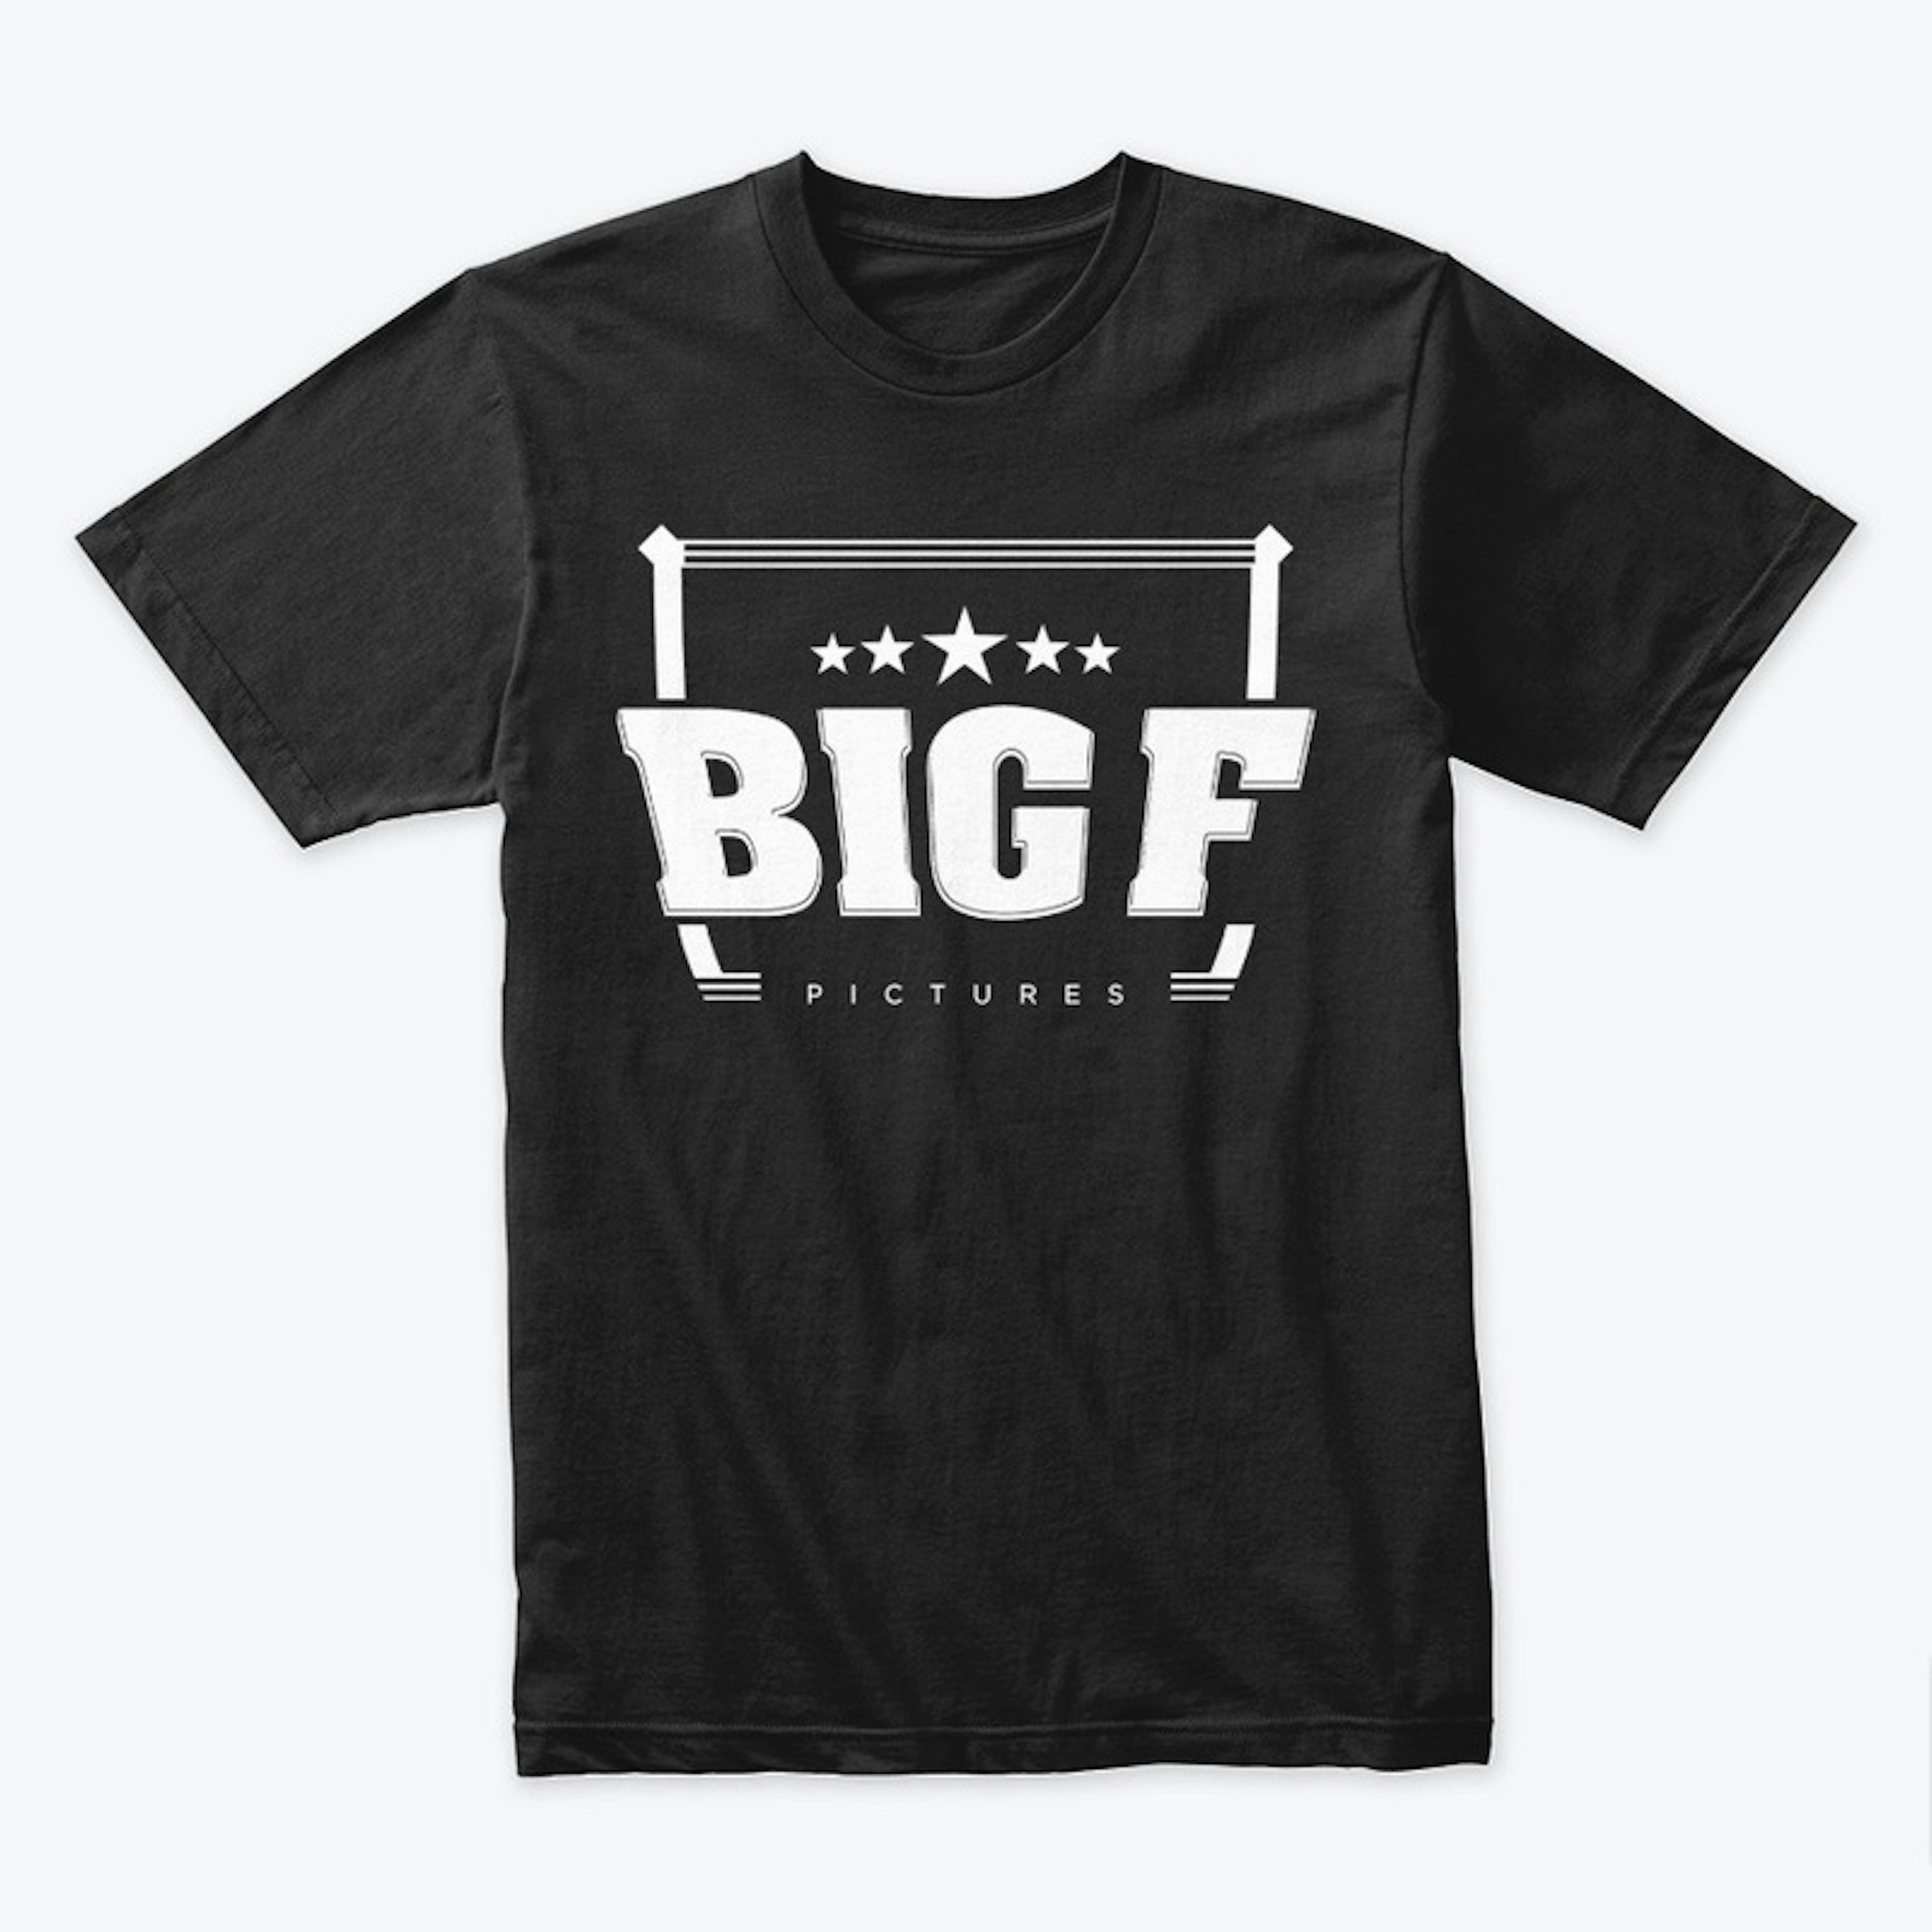 Big F Pictures T-Shirts